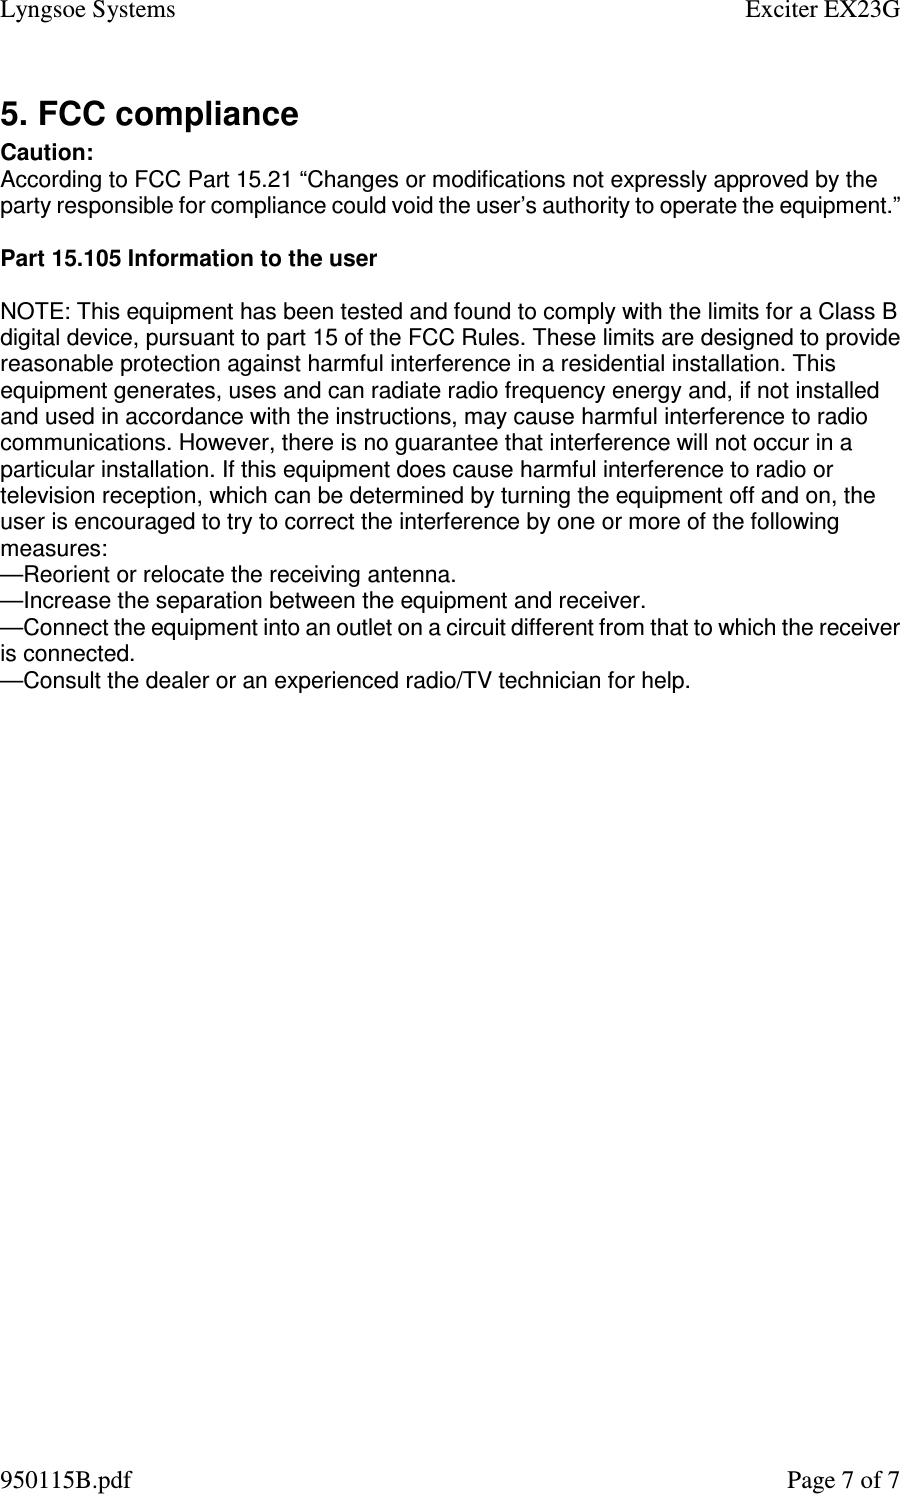 Lyngsoe Systems    Exciter EX23G 950115B.pdf    Page 7 of 7 5. FCC compliance Caution: According to FCC Part 15.21 “Changes or modifications not expressly approved by the party responsible for compliance could void the user’s authority to operate the equipment.”  Part 15.105 Information to the user  NOTE: This equipment has been tested and found to comply with the limits for a Class B digital device, pursuant to part 15 of the FCC Rules. These limits are designed to provide reasonable protection against harmful interference in a residential installation. This equipment generates, uses and can radiate radio frequency energy and, if not installed and used in accordance with the instructions, may cause harmful interference to radio communications. However, there is no guarantee that interference will not occur in a particular installation. If this equipment does cause harmful interference to radio or television reception, which can be determined by turning the equipment off and on, the user is encouraged to try to correct the interference by one or more of the following measures: —Reorient or relocate the receiving antenna. —Increase the separation between the equipment and receiver. —Connect the equipment into an outlet on a circuit different from that to which the receiver is connected. —Consult the dealer or an experienced radio/TV technician for help.   